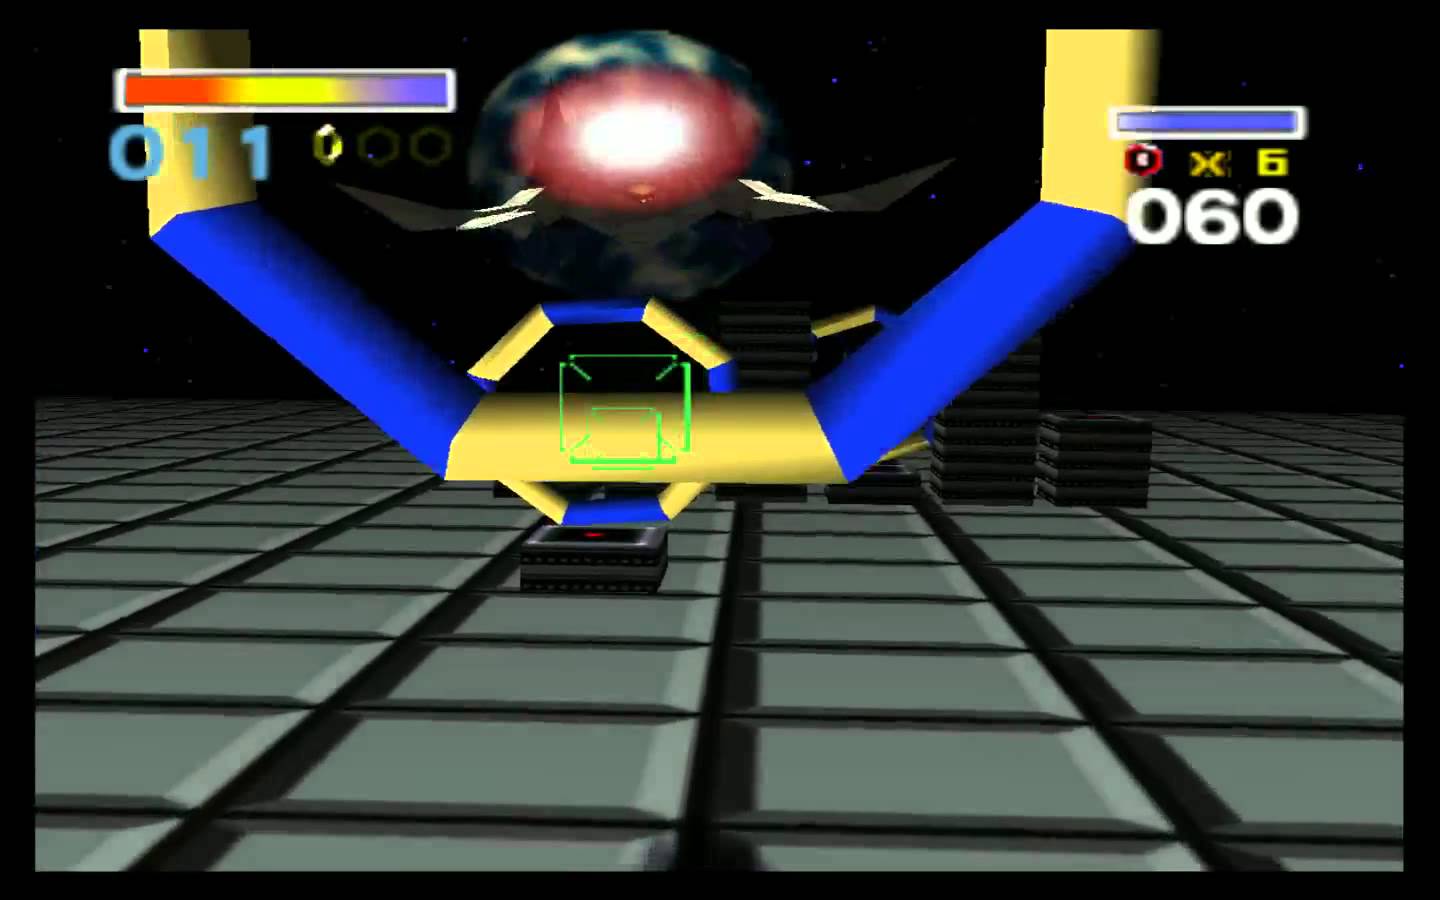 Virtual Consolation Prize: Star Fox 64 On The Way